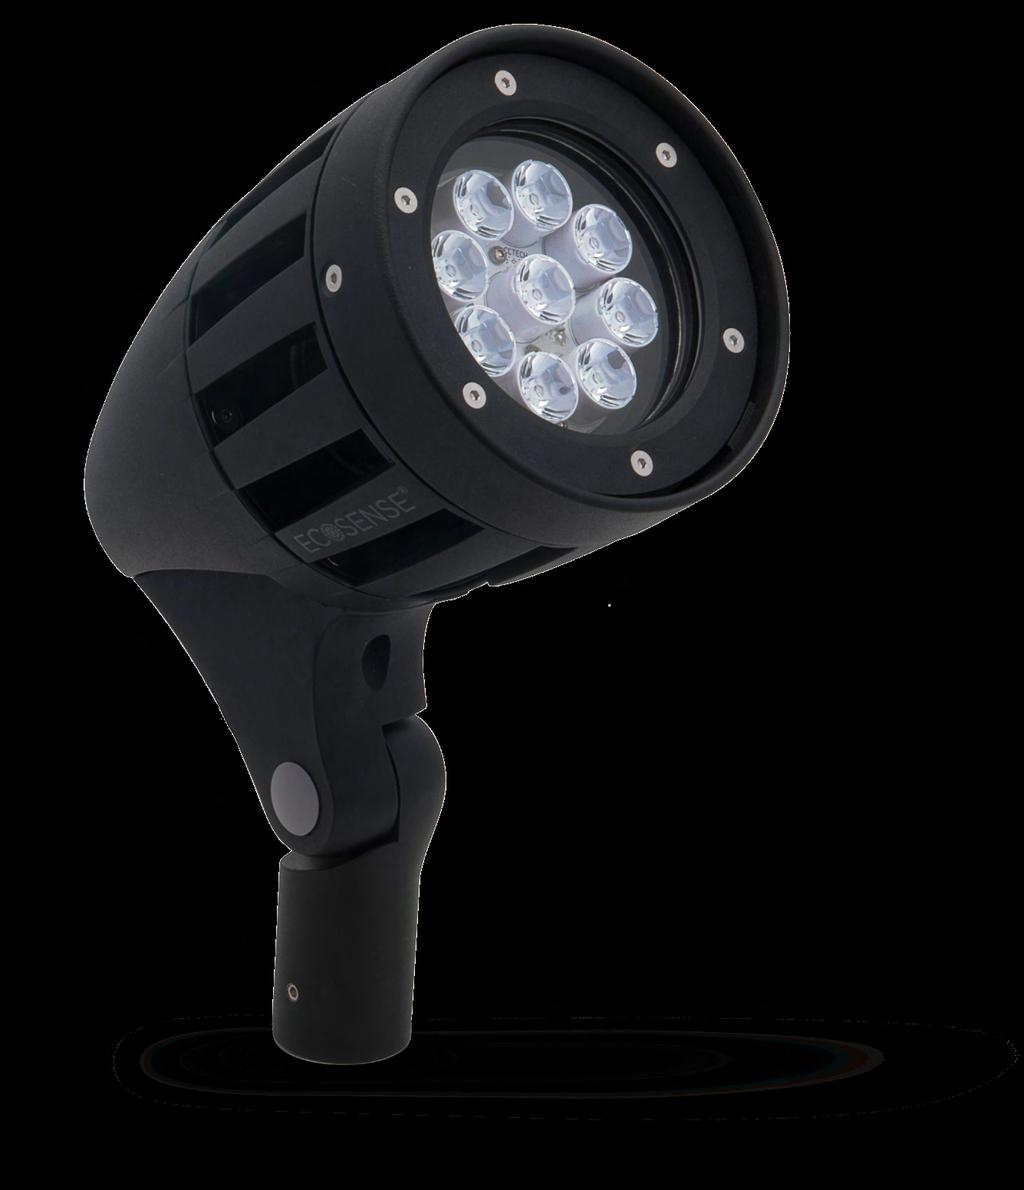 EcoSpec FLOODLIGHT BULLET INTERIOR + EXTERIOR LOADED WITH OPTIONS. EcoSpec Floodlight Bullet is an award-winning, highly efficient and powerful indoor- and outdoorrated luminaire.